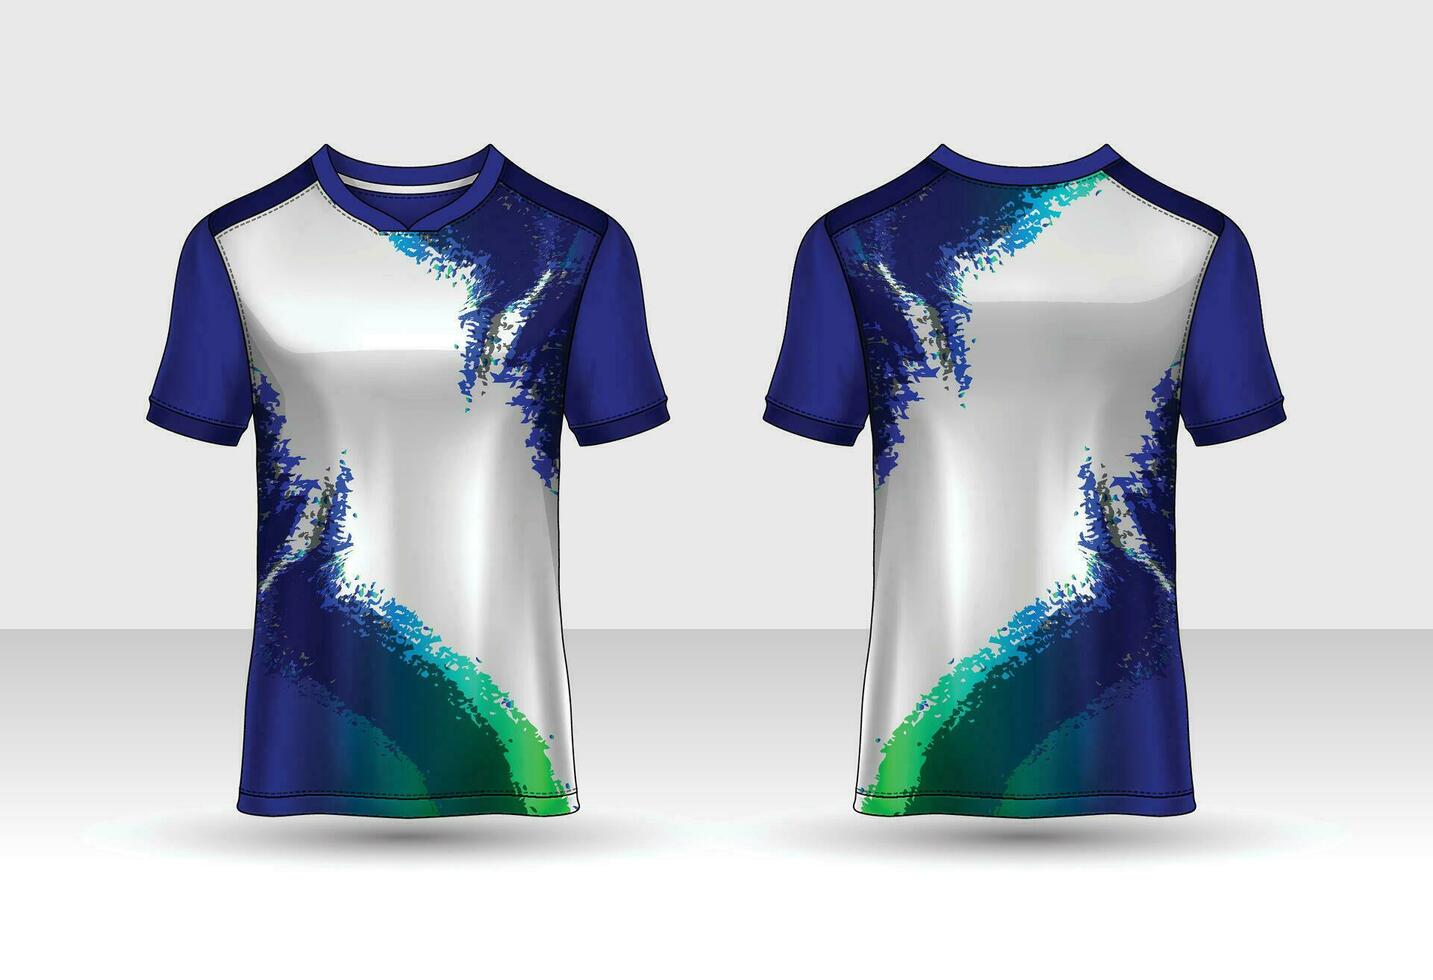 Sports t-shirt jersey design concept vector template, rhombus pattern v neck Football jersey concept with front and back view for Soccer, Cricket, Volleyball, Rugby, tennis, badminton uniform kit